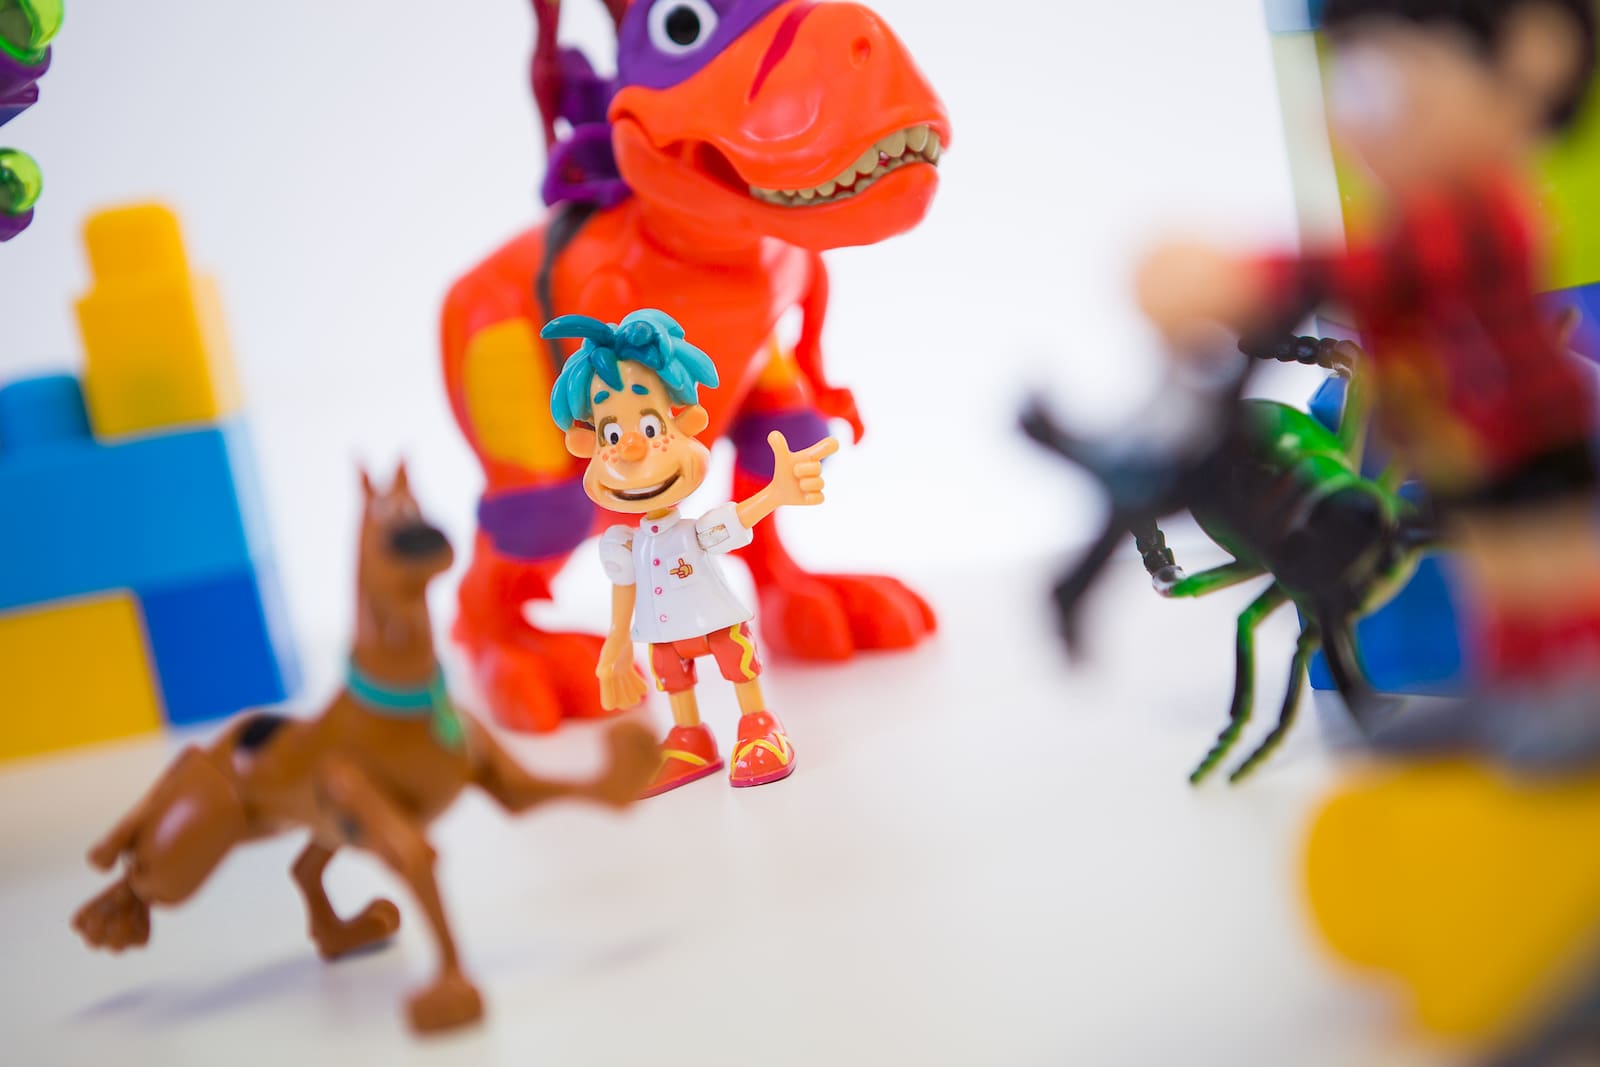 Image of small, brightly coloured toys on a table.